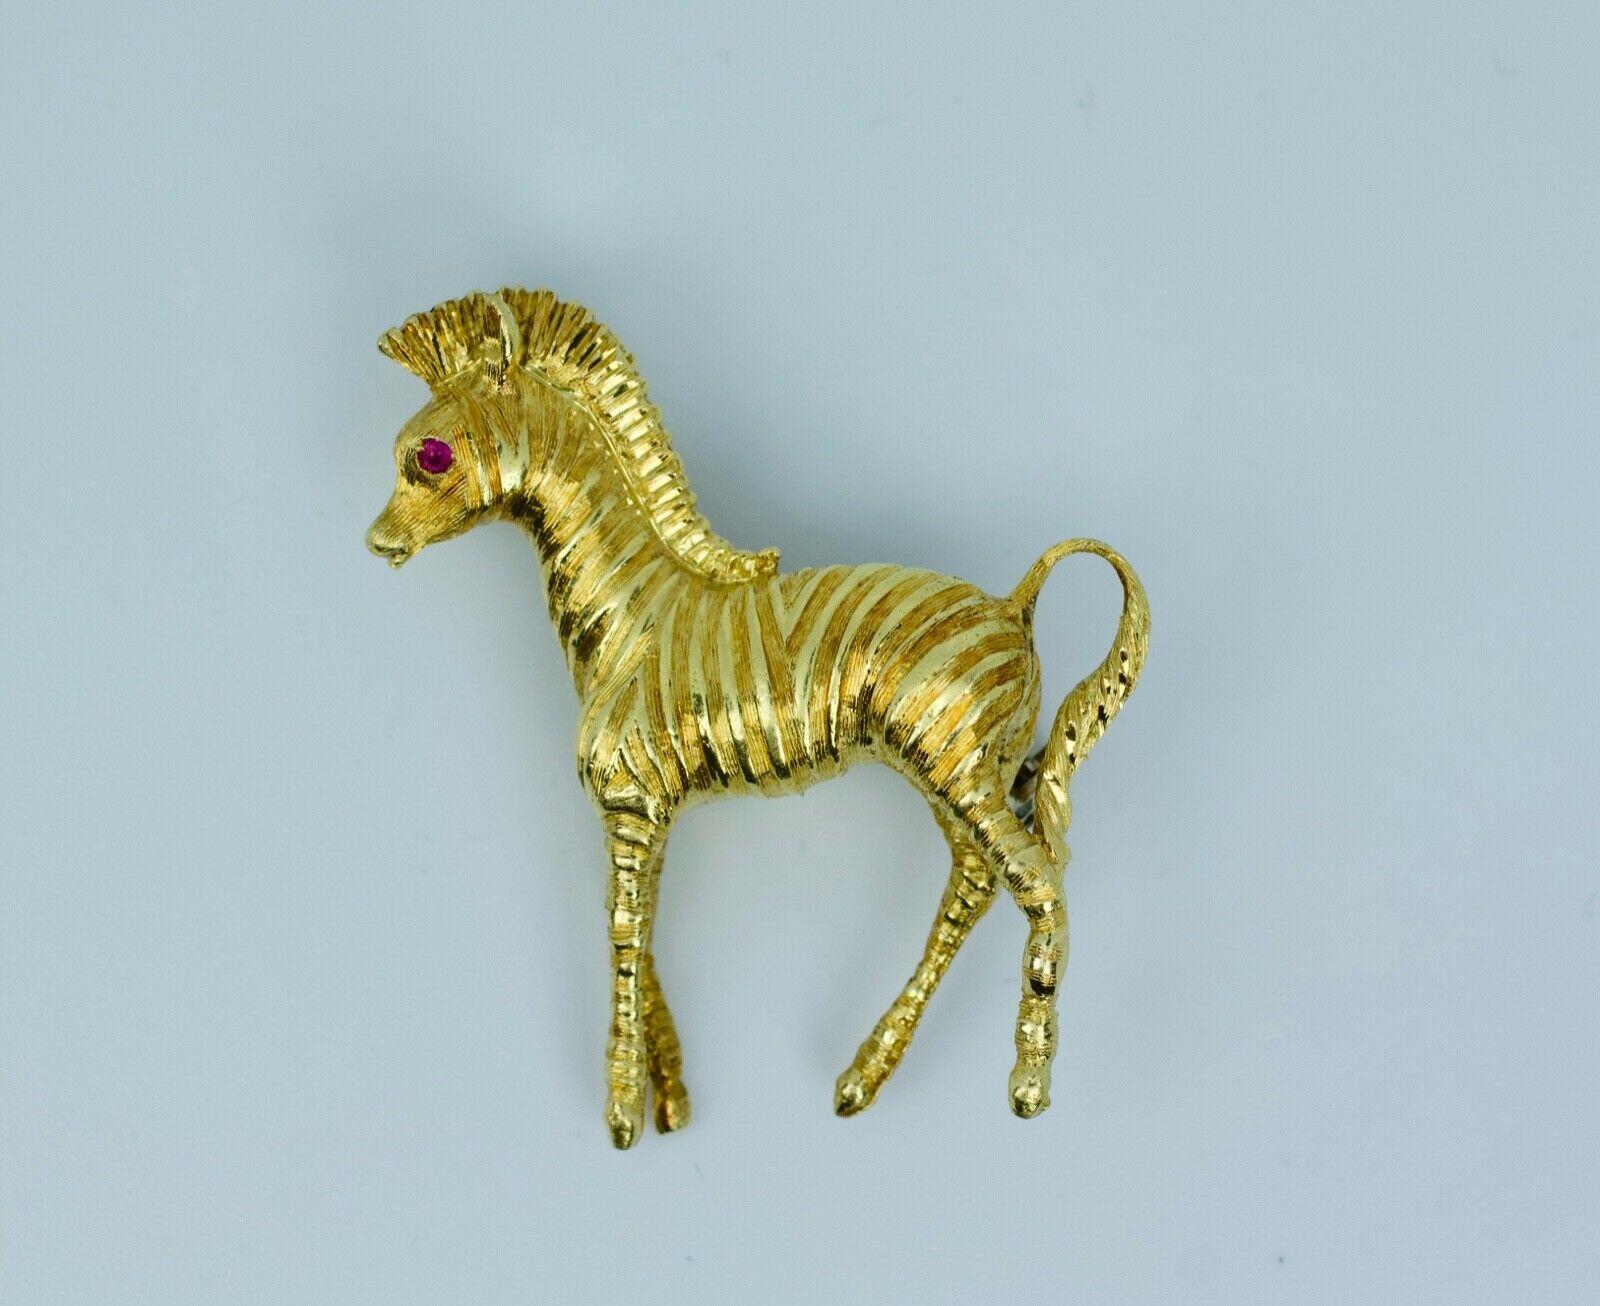 Garavelli Aldo 18k Yellow Gold Round Ruby Eye Zebra Pin
9.7 Grams
1.24 Inches tall
1.25 inch wide
1 Round Red Ruby Eye
This is a very unique Pin. It was made by Garavelli Aldo and this highly detailed pin also has hallmarks. If you have any